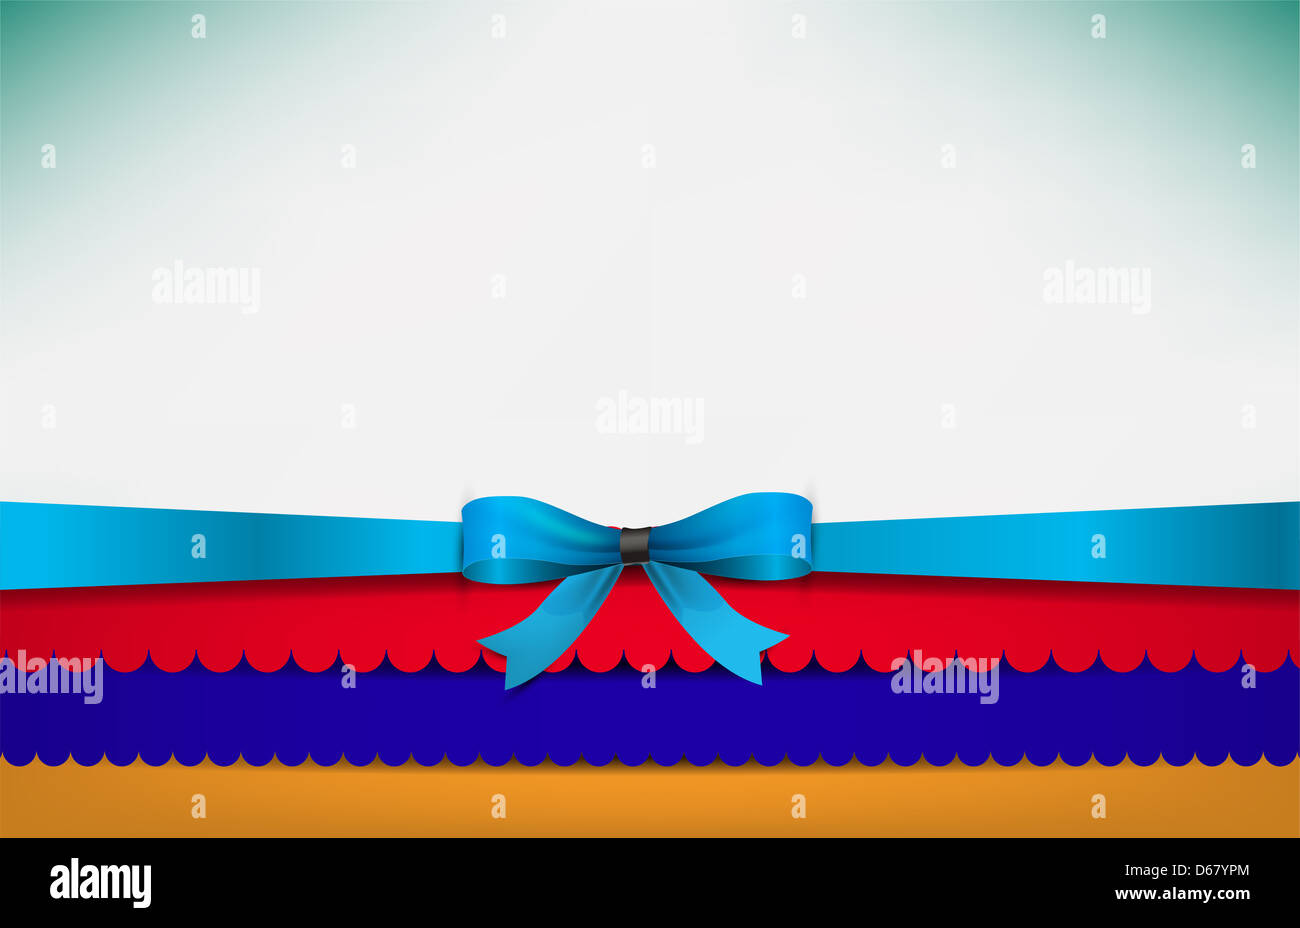 Abstract background with the Armenia Flag and a blue bow. Stock Photo